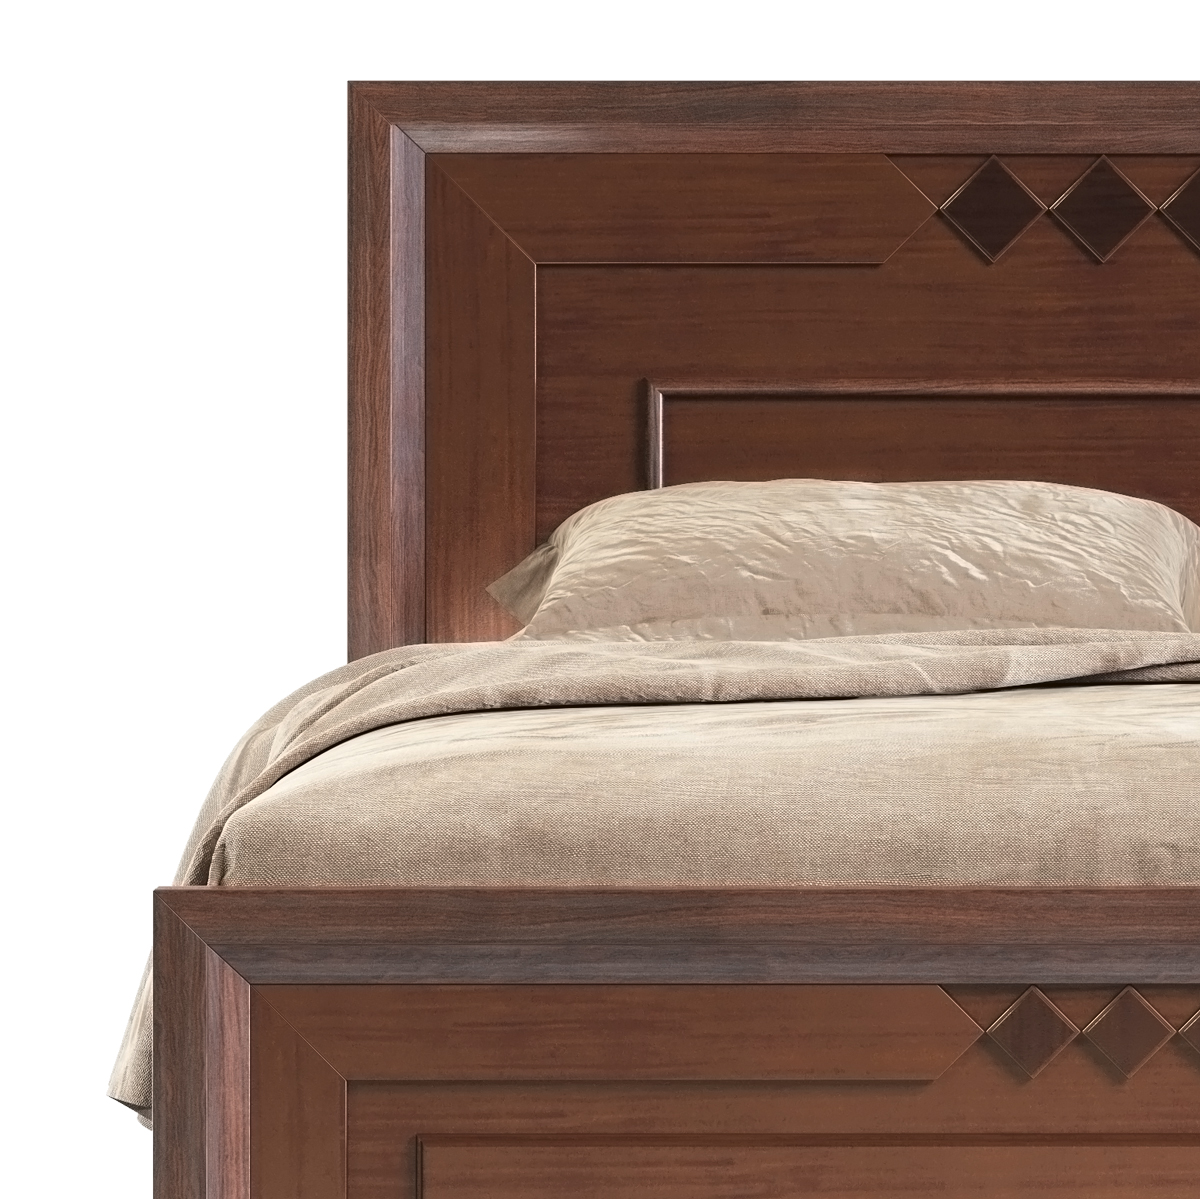 5 Star Wooden double bed I BDH-365-3-1-20